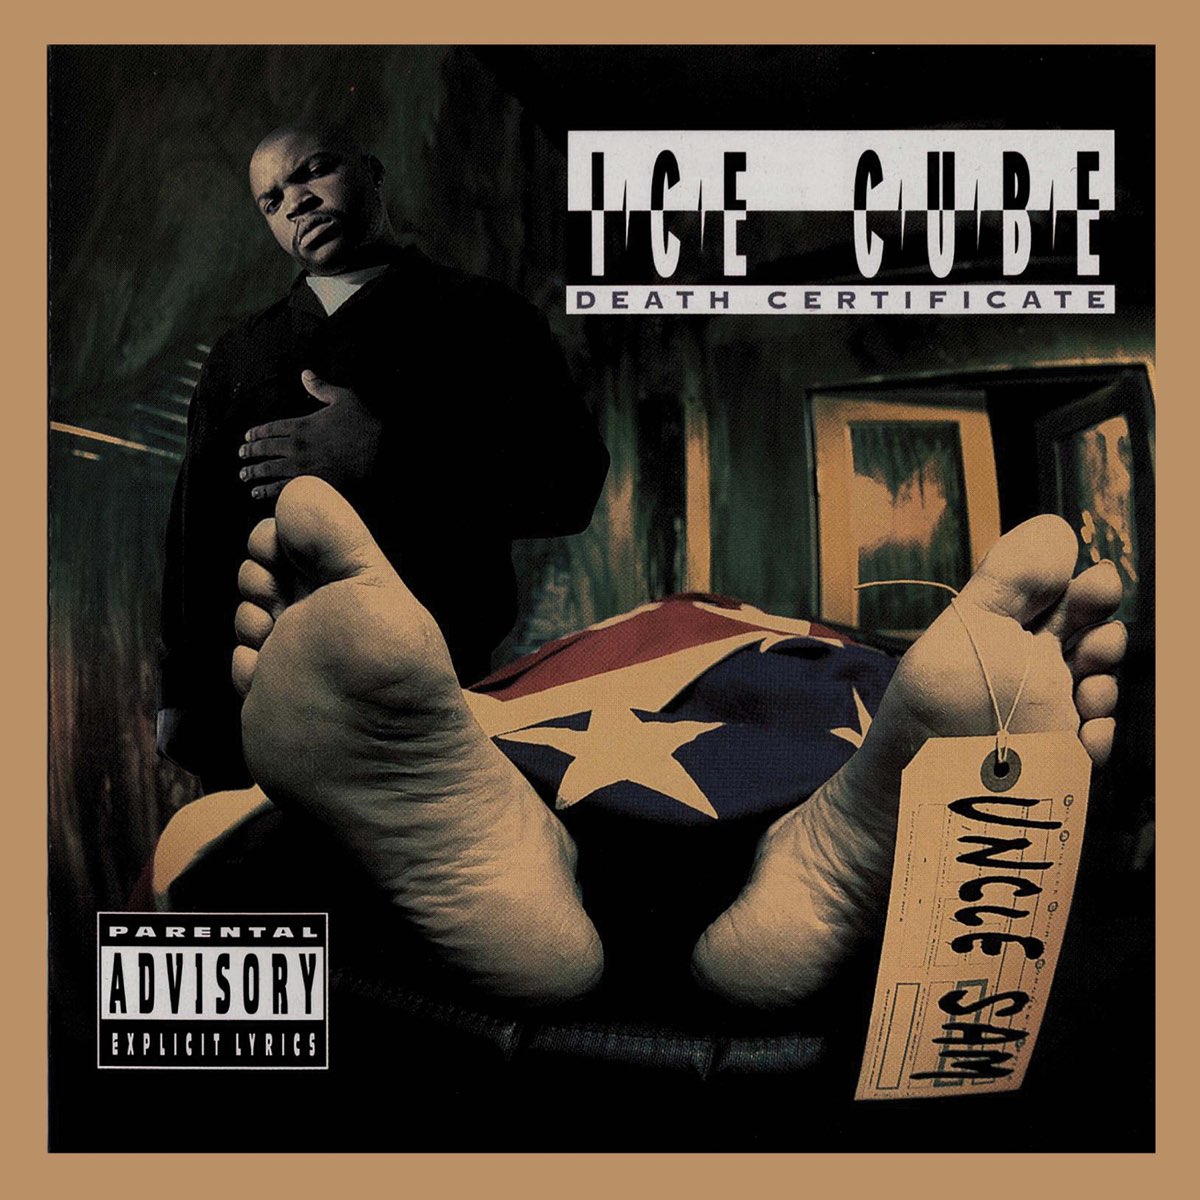 Death Certificate (Complete Edition) by Ice Cube on Apple Music